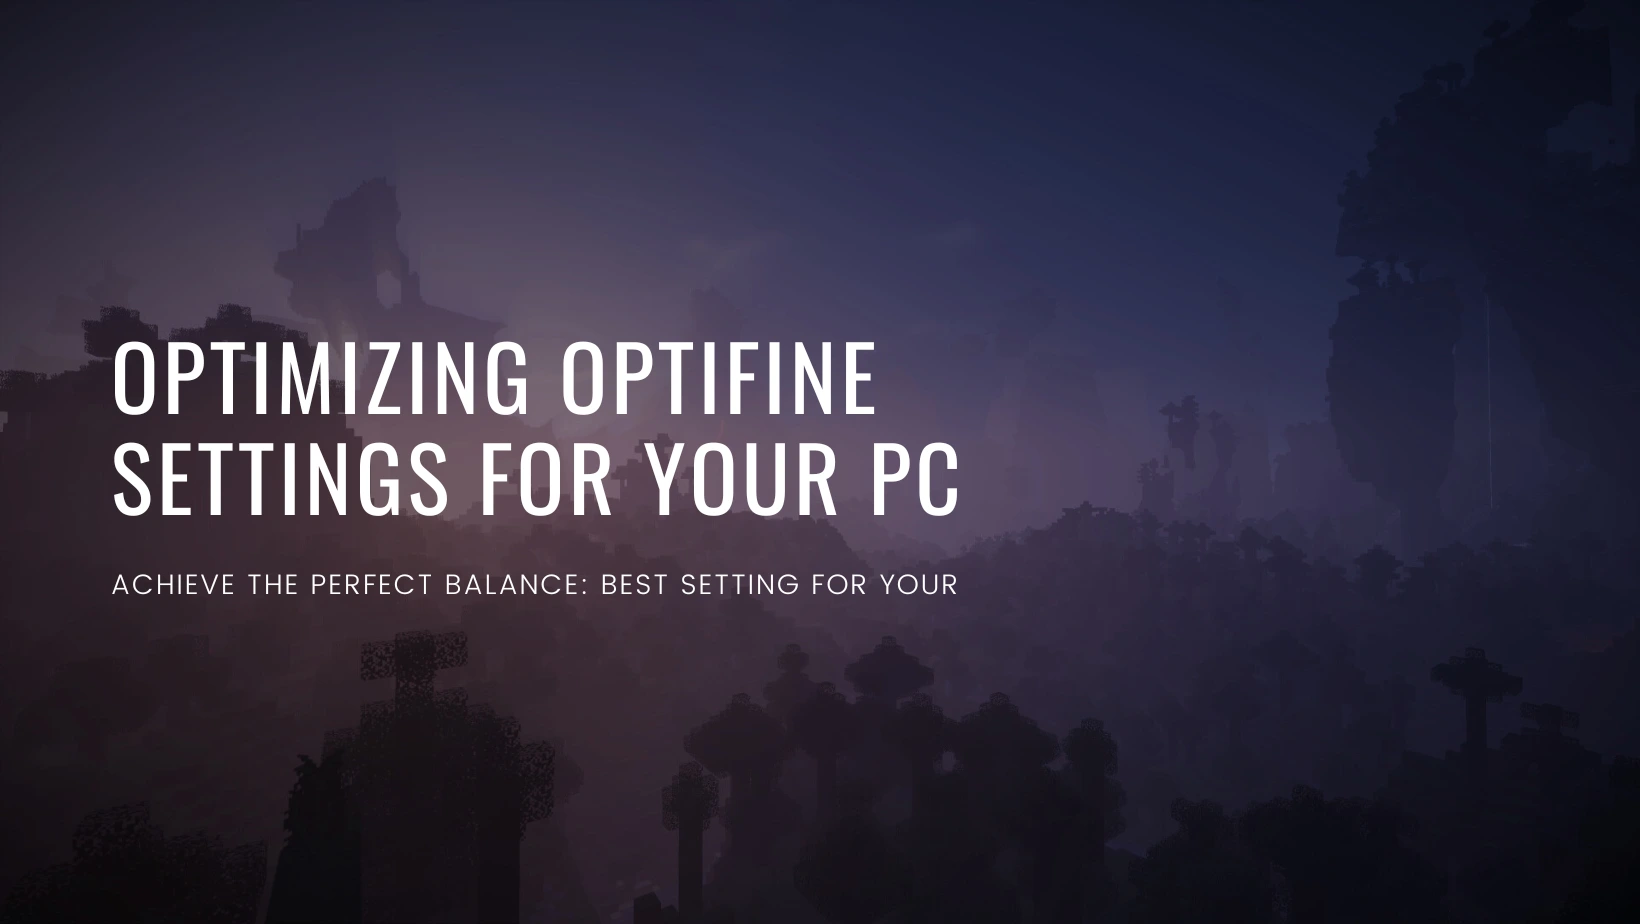 Optimizing OptiFine Settings for Your PC